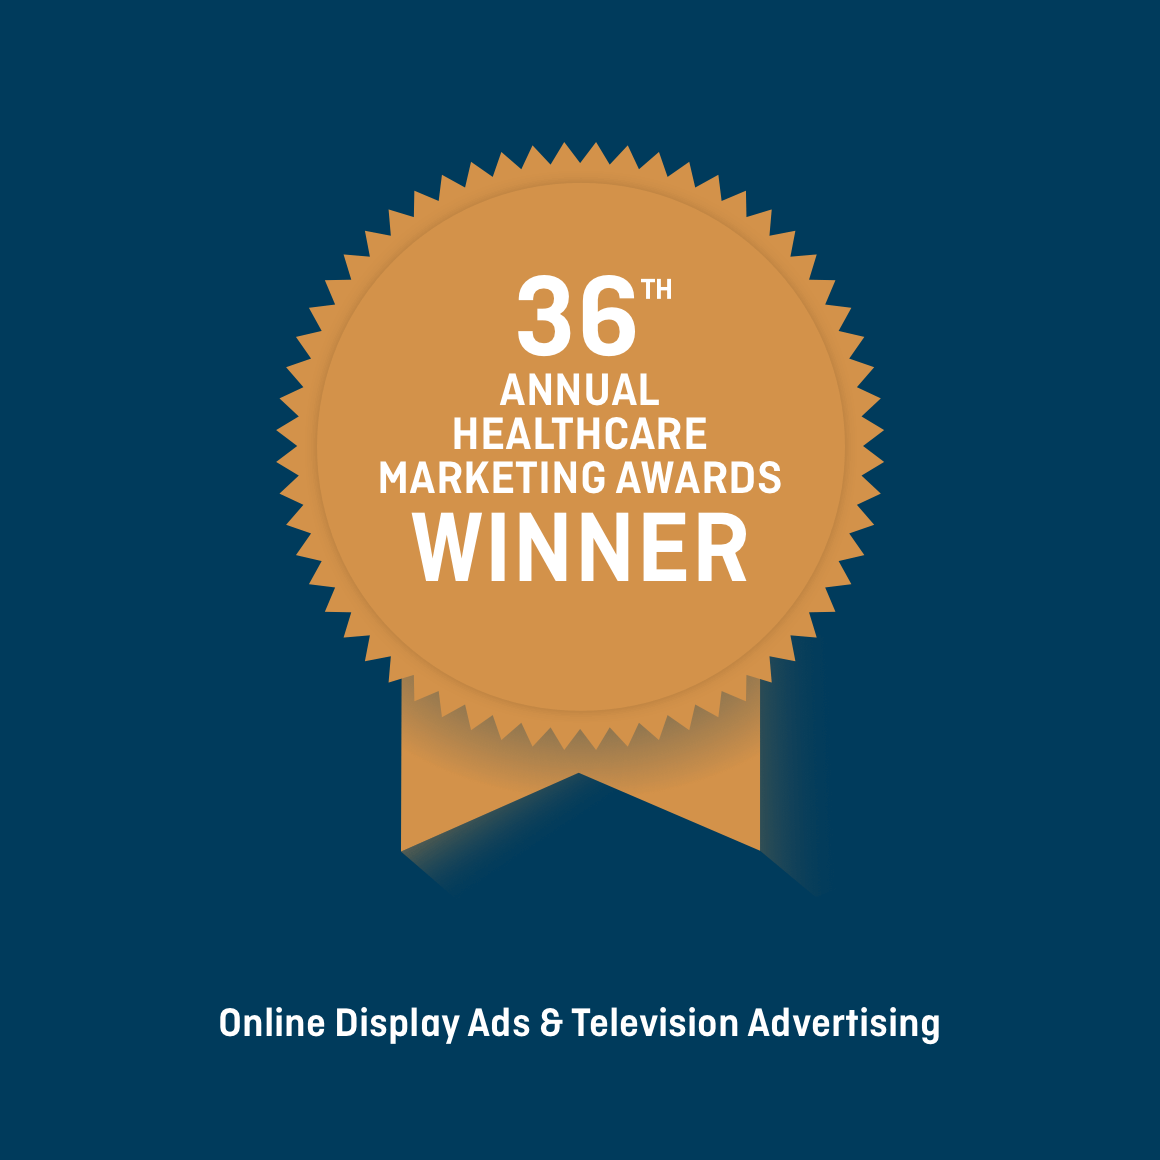 36th Annual Healthcare Marketing Awards Winner Online Display Ads and Television Advertising